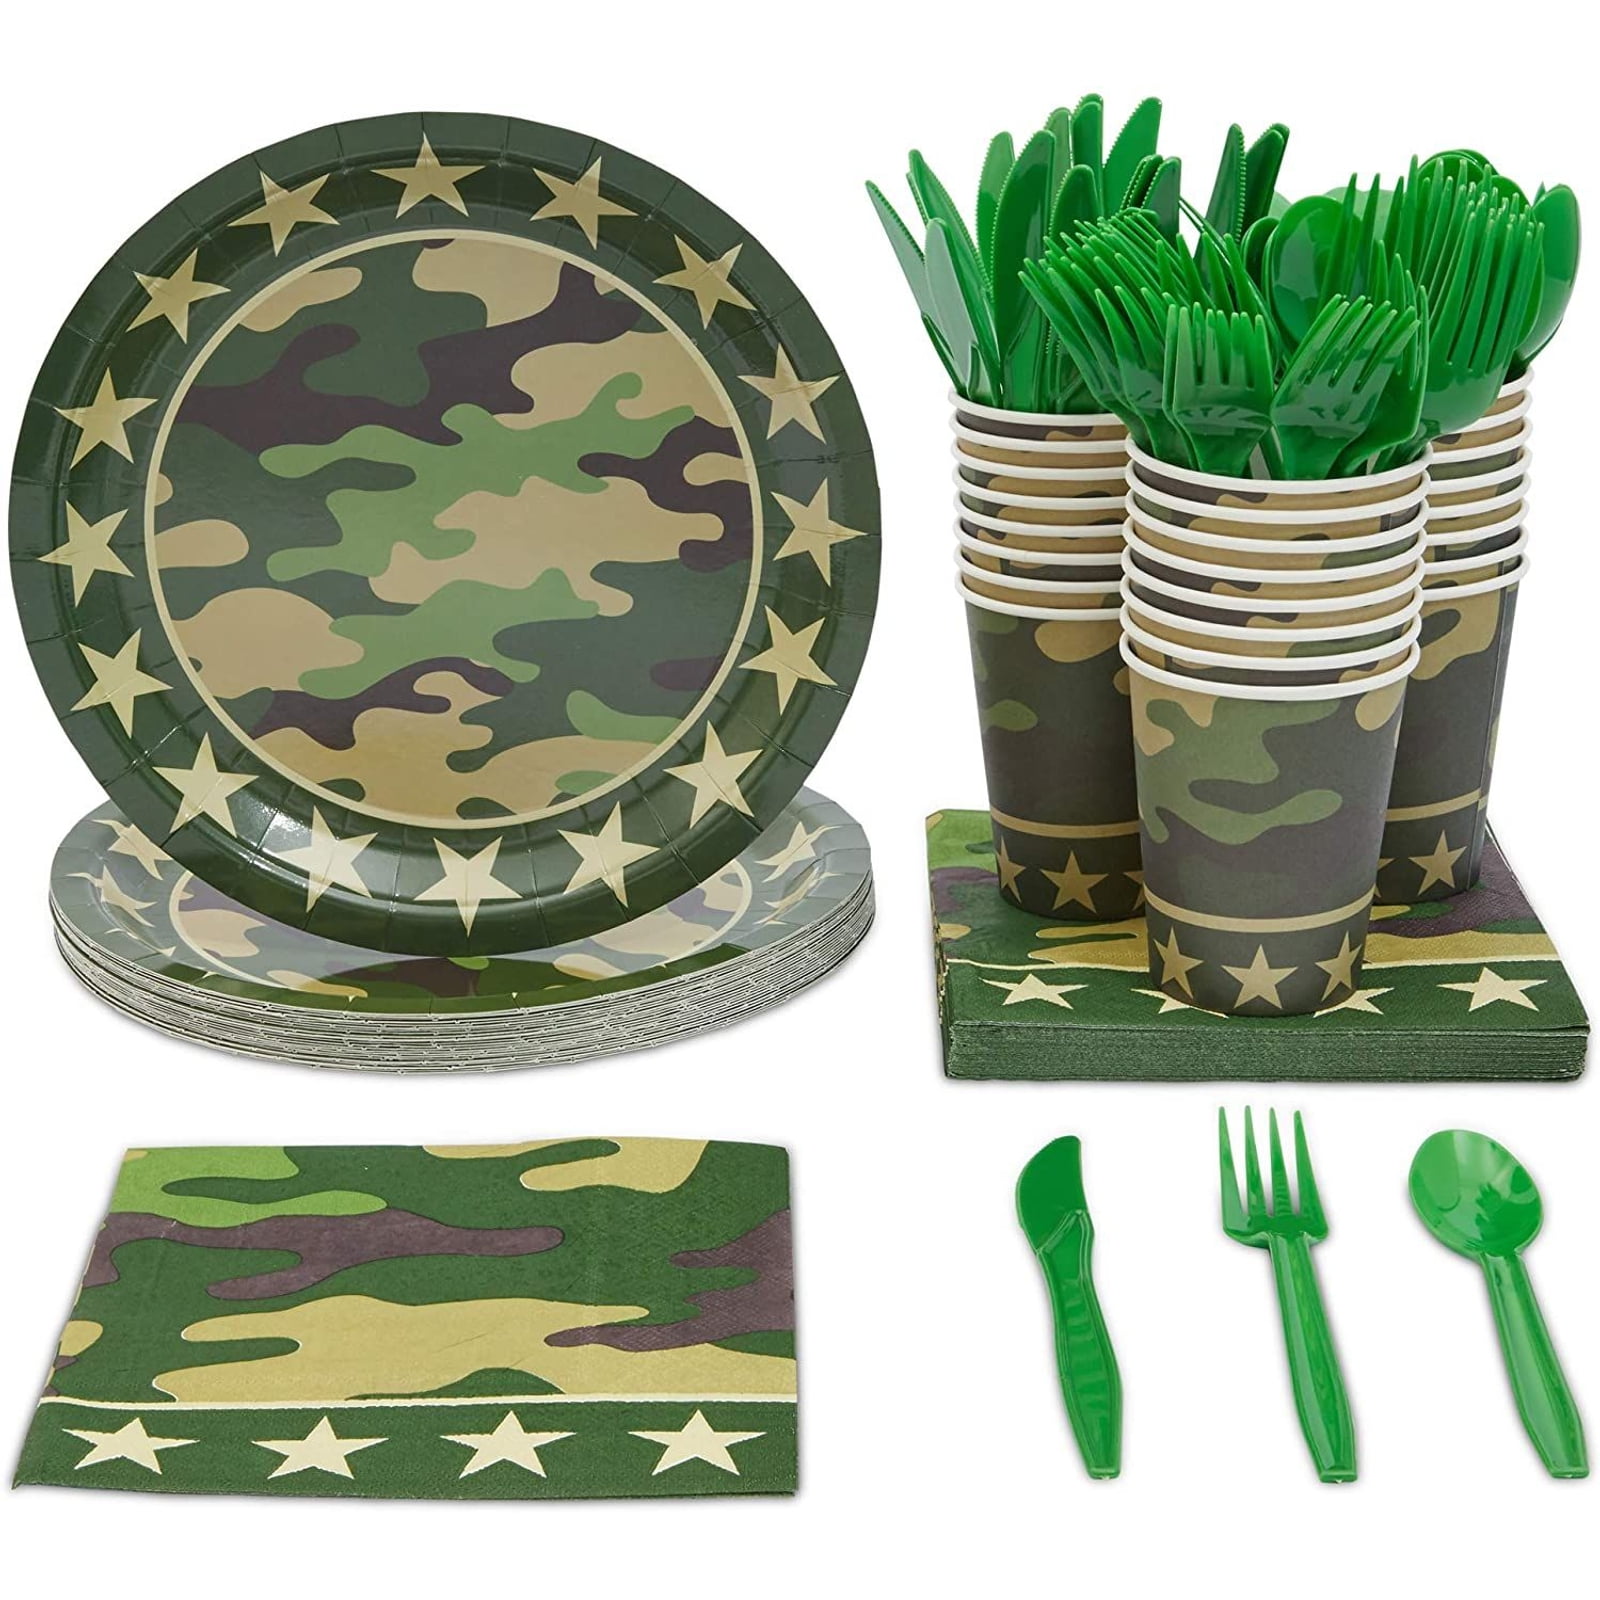 PINK HUNTING CAMO Birthday Party Supply Kit w/ Plates,Napkins & Cups 